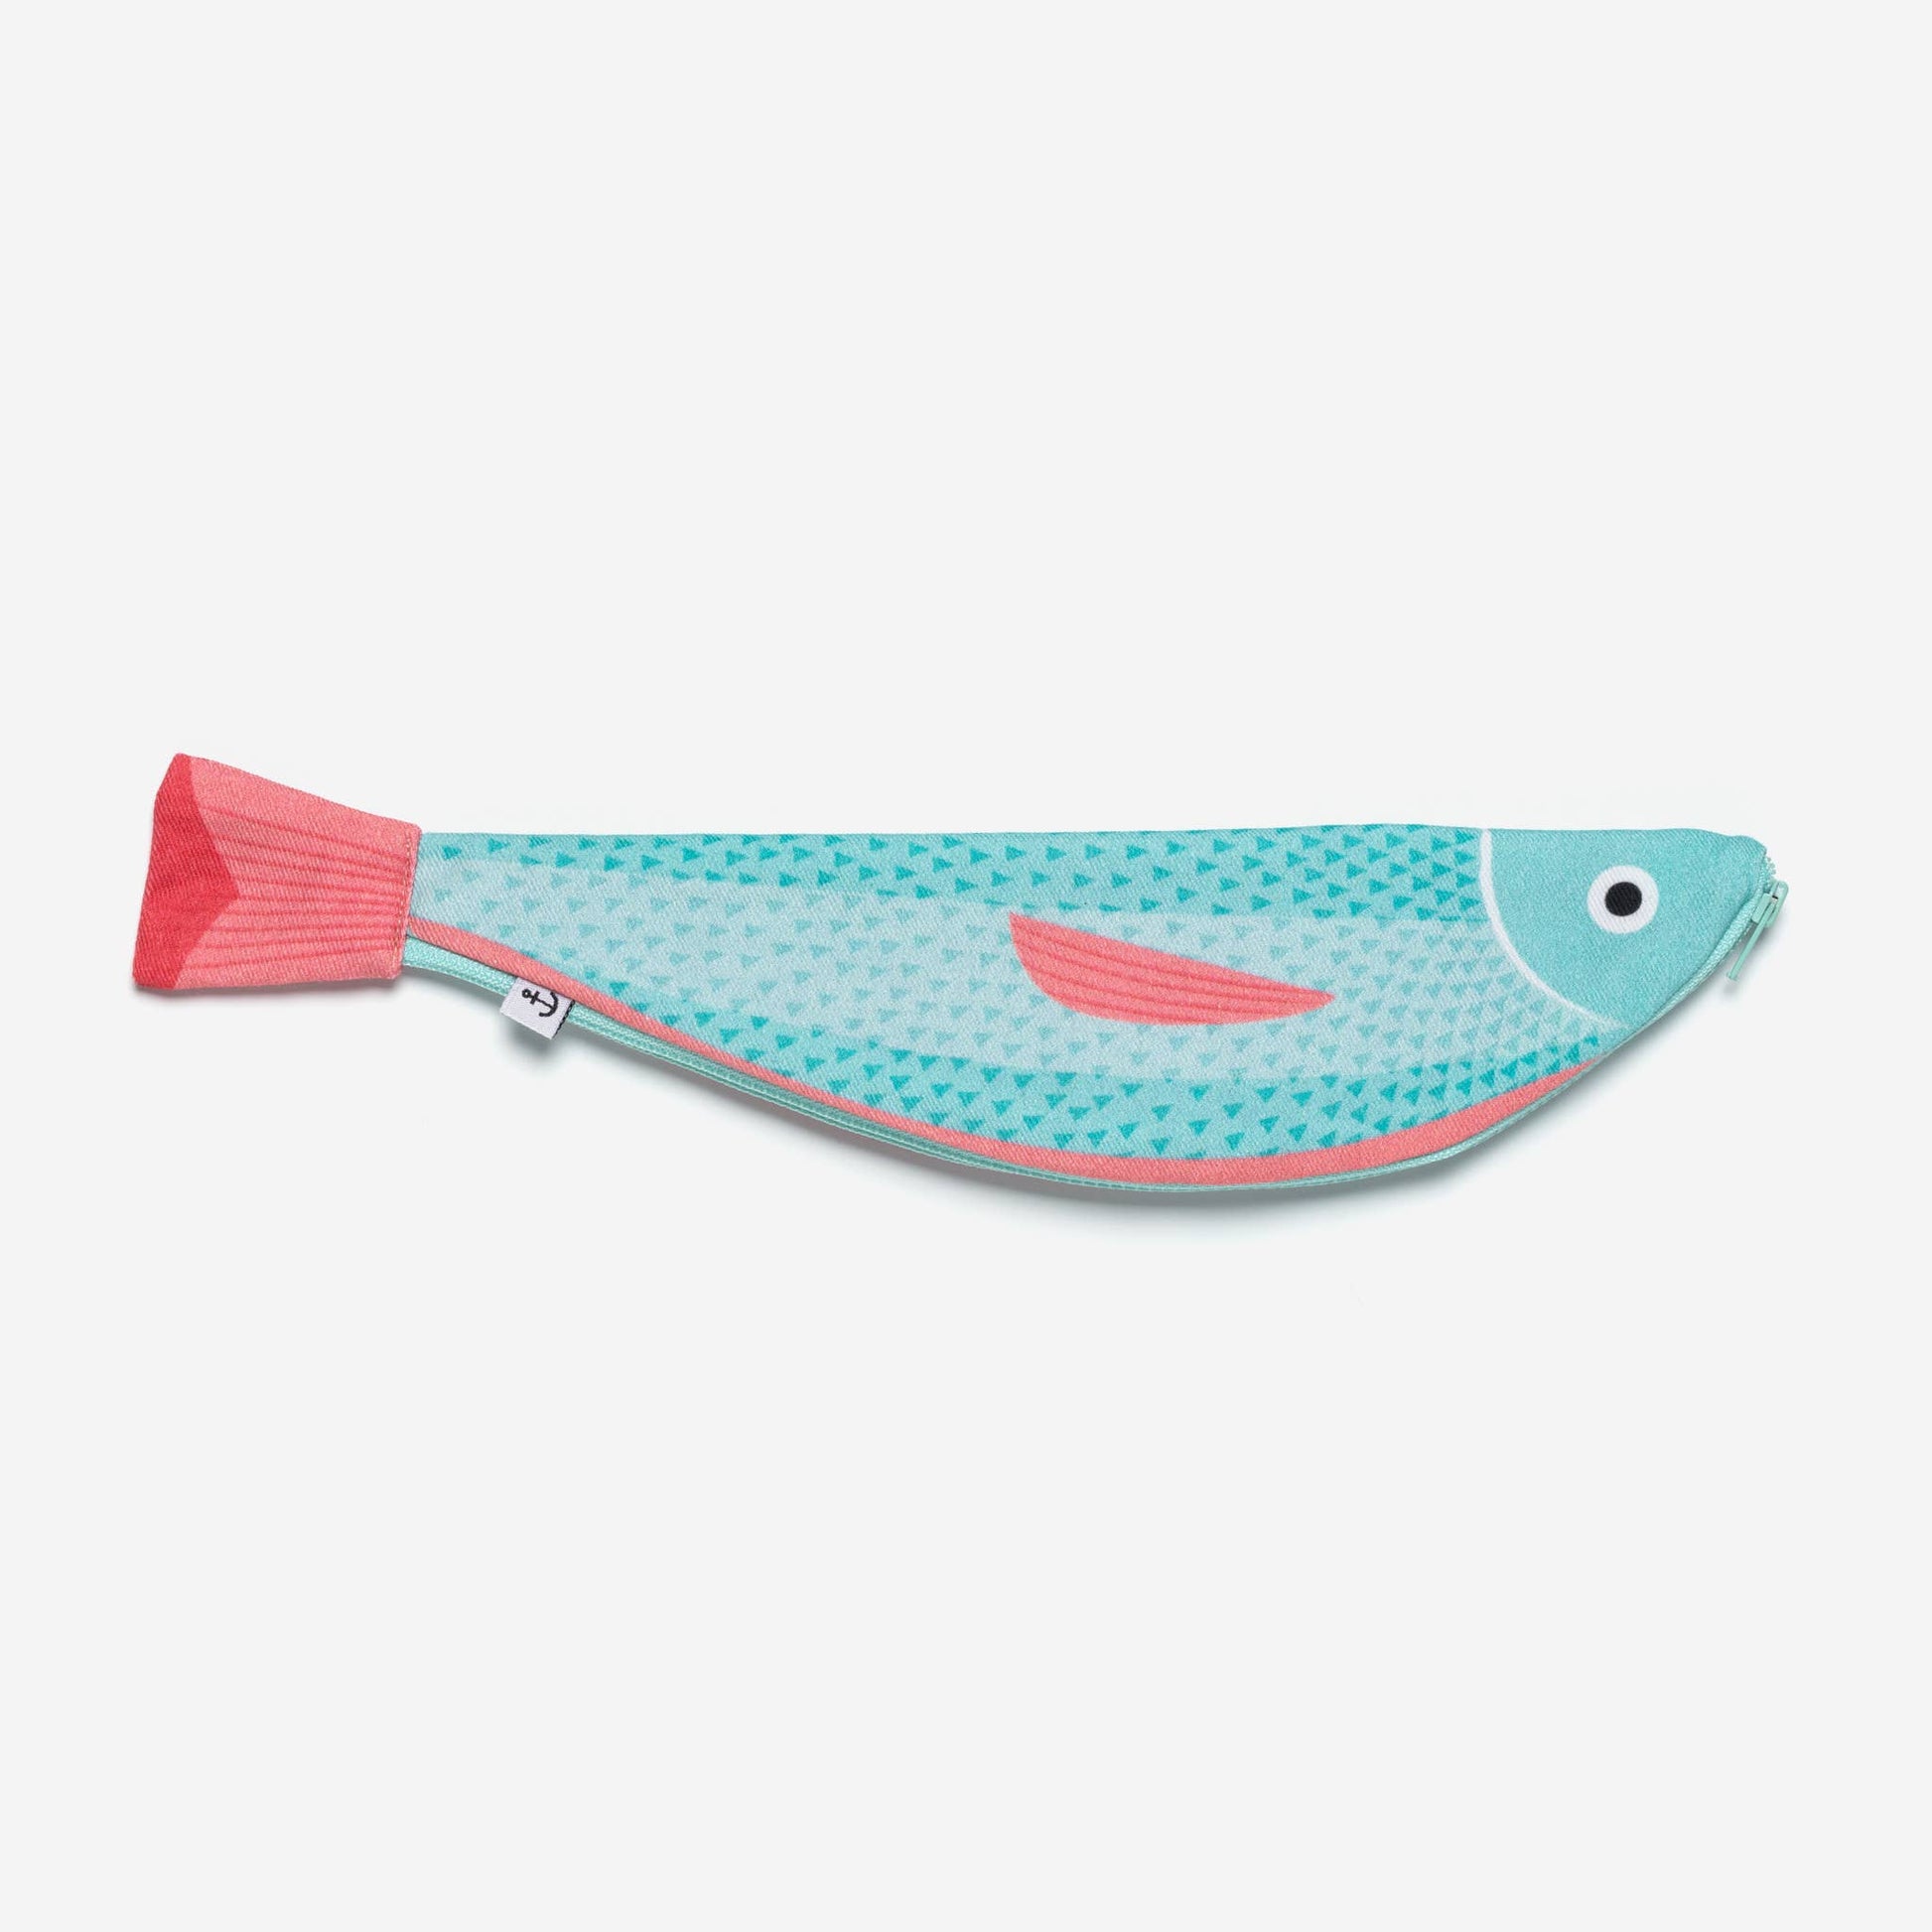 Verdin fish zippered pouch -- body is turquoise, fins are pink 